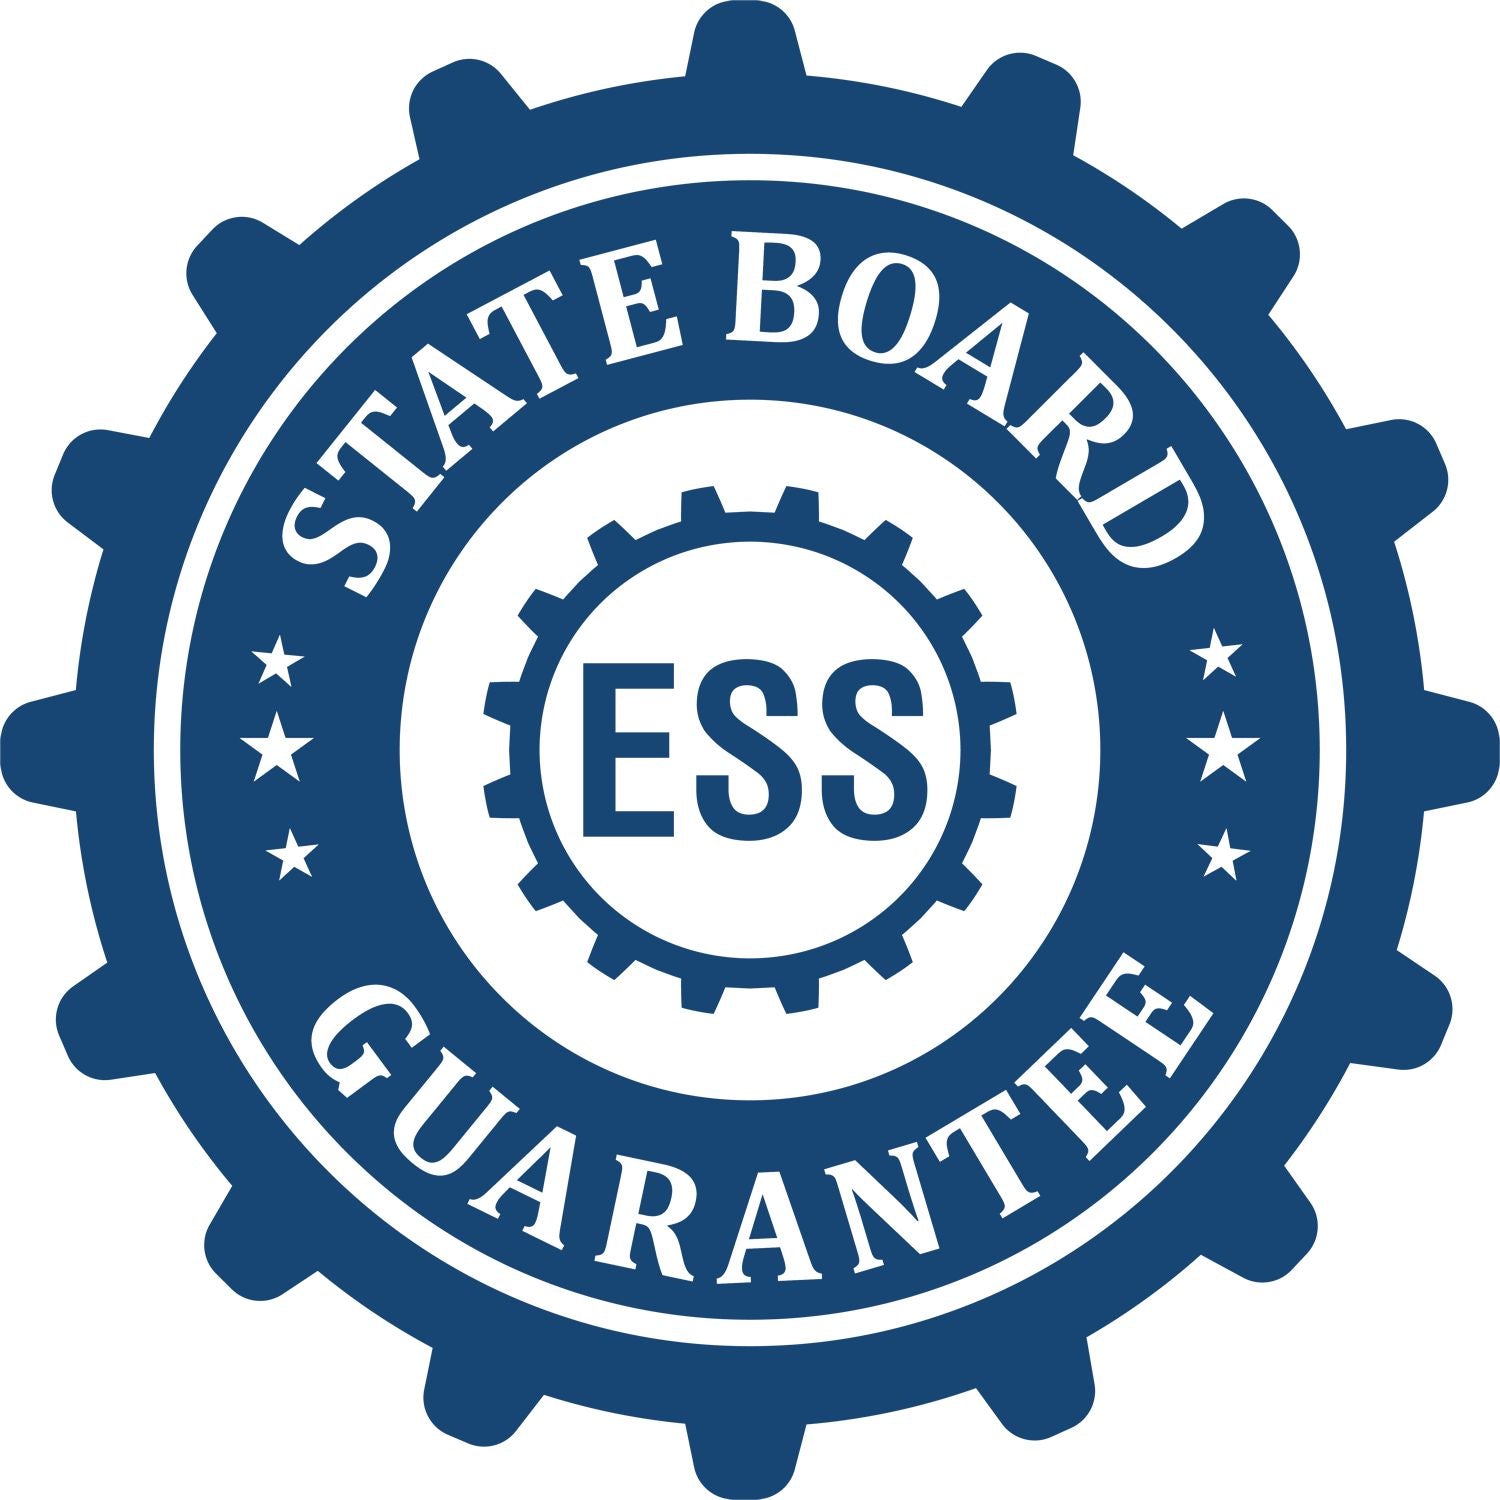 An emblem in a gear shape illustrating a state board guarantee for the Colorado Engineer Desk Seal product.